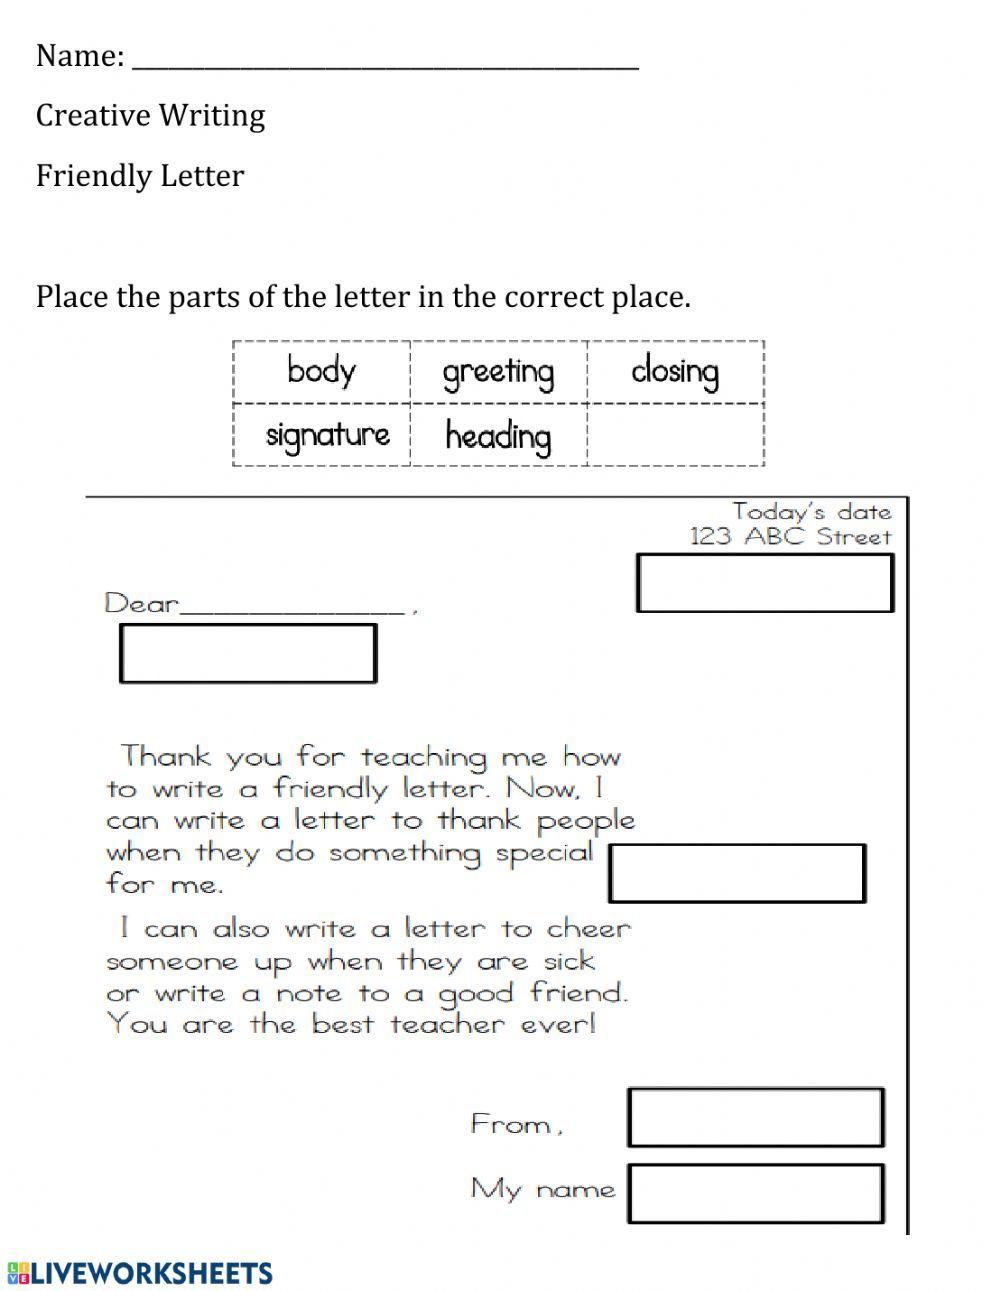 Parts of the Friendly Letter